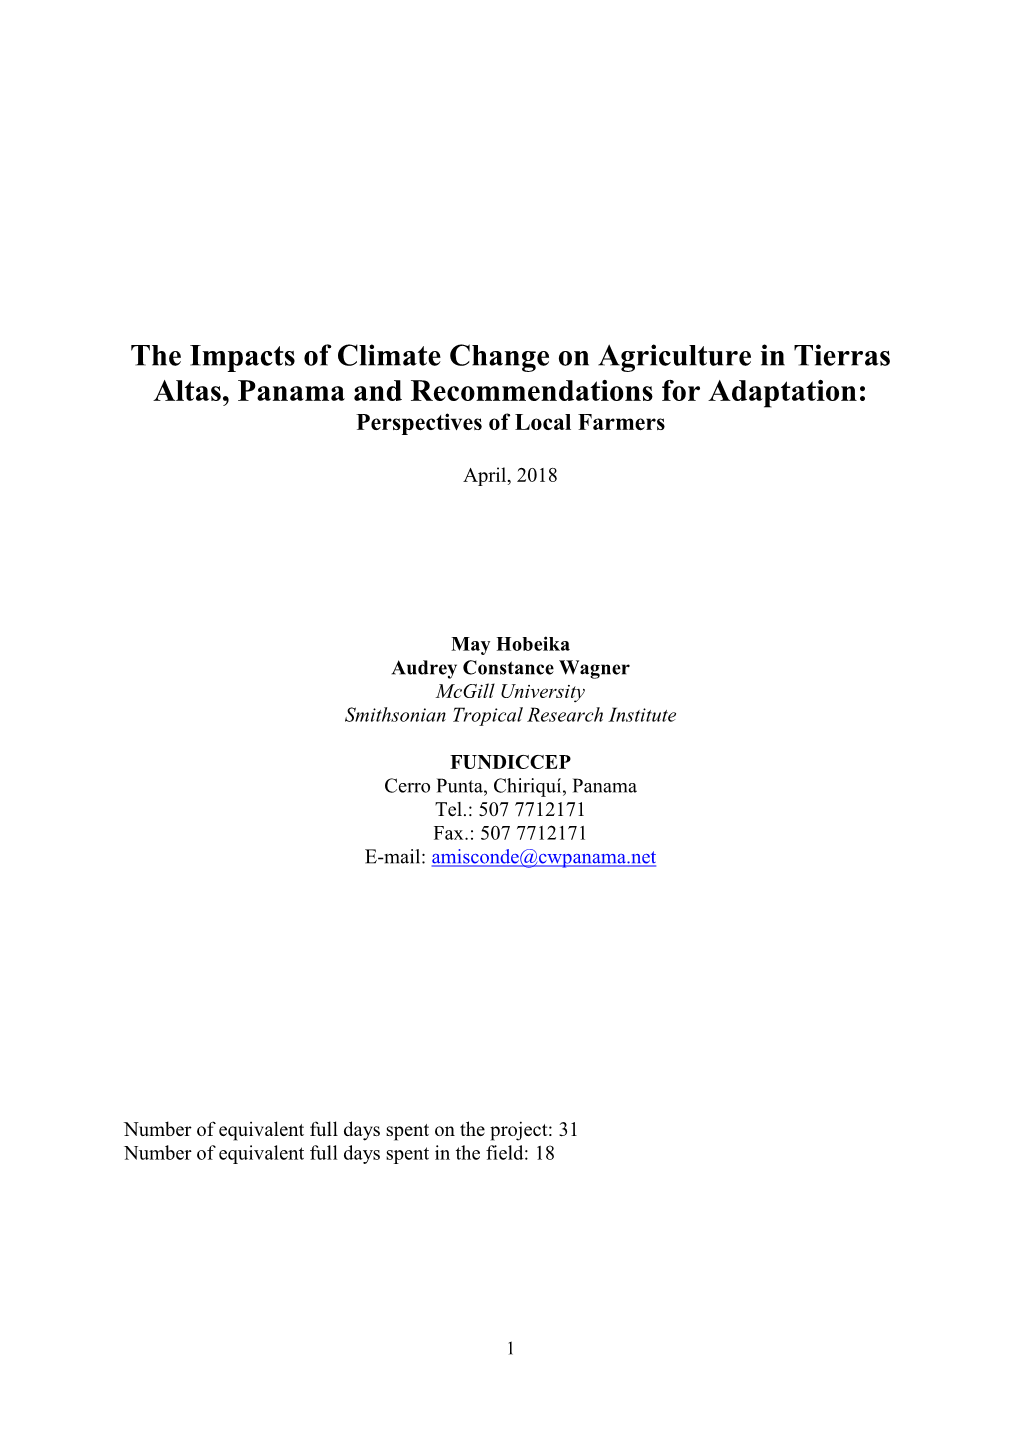 The Impacts of Climate Change on Agriculture in Tierras Altas, Panama and Recommendations for Adaptation: Perspectives of Local Farmers